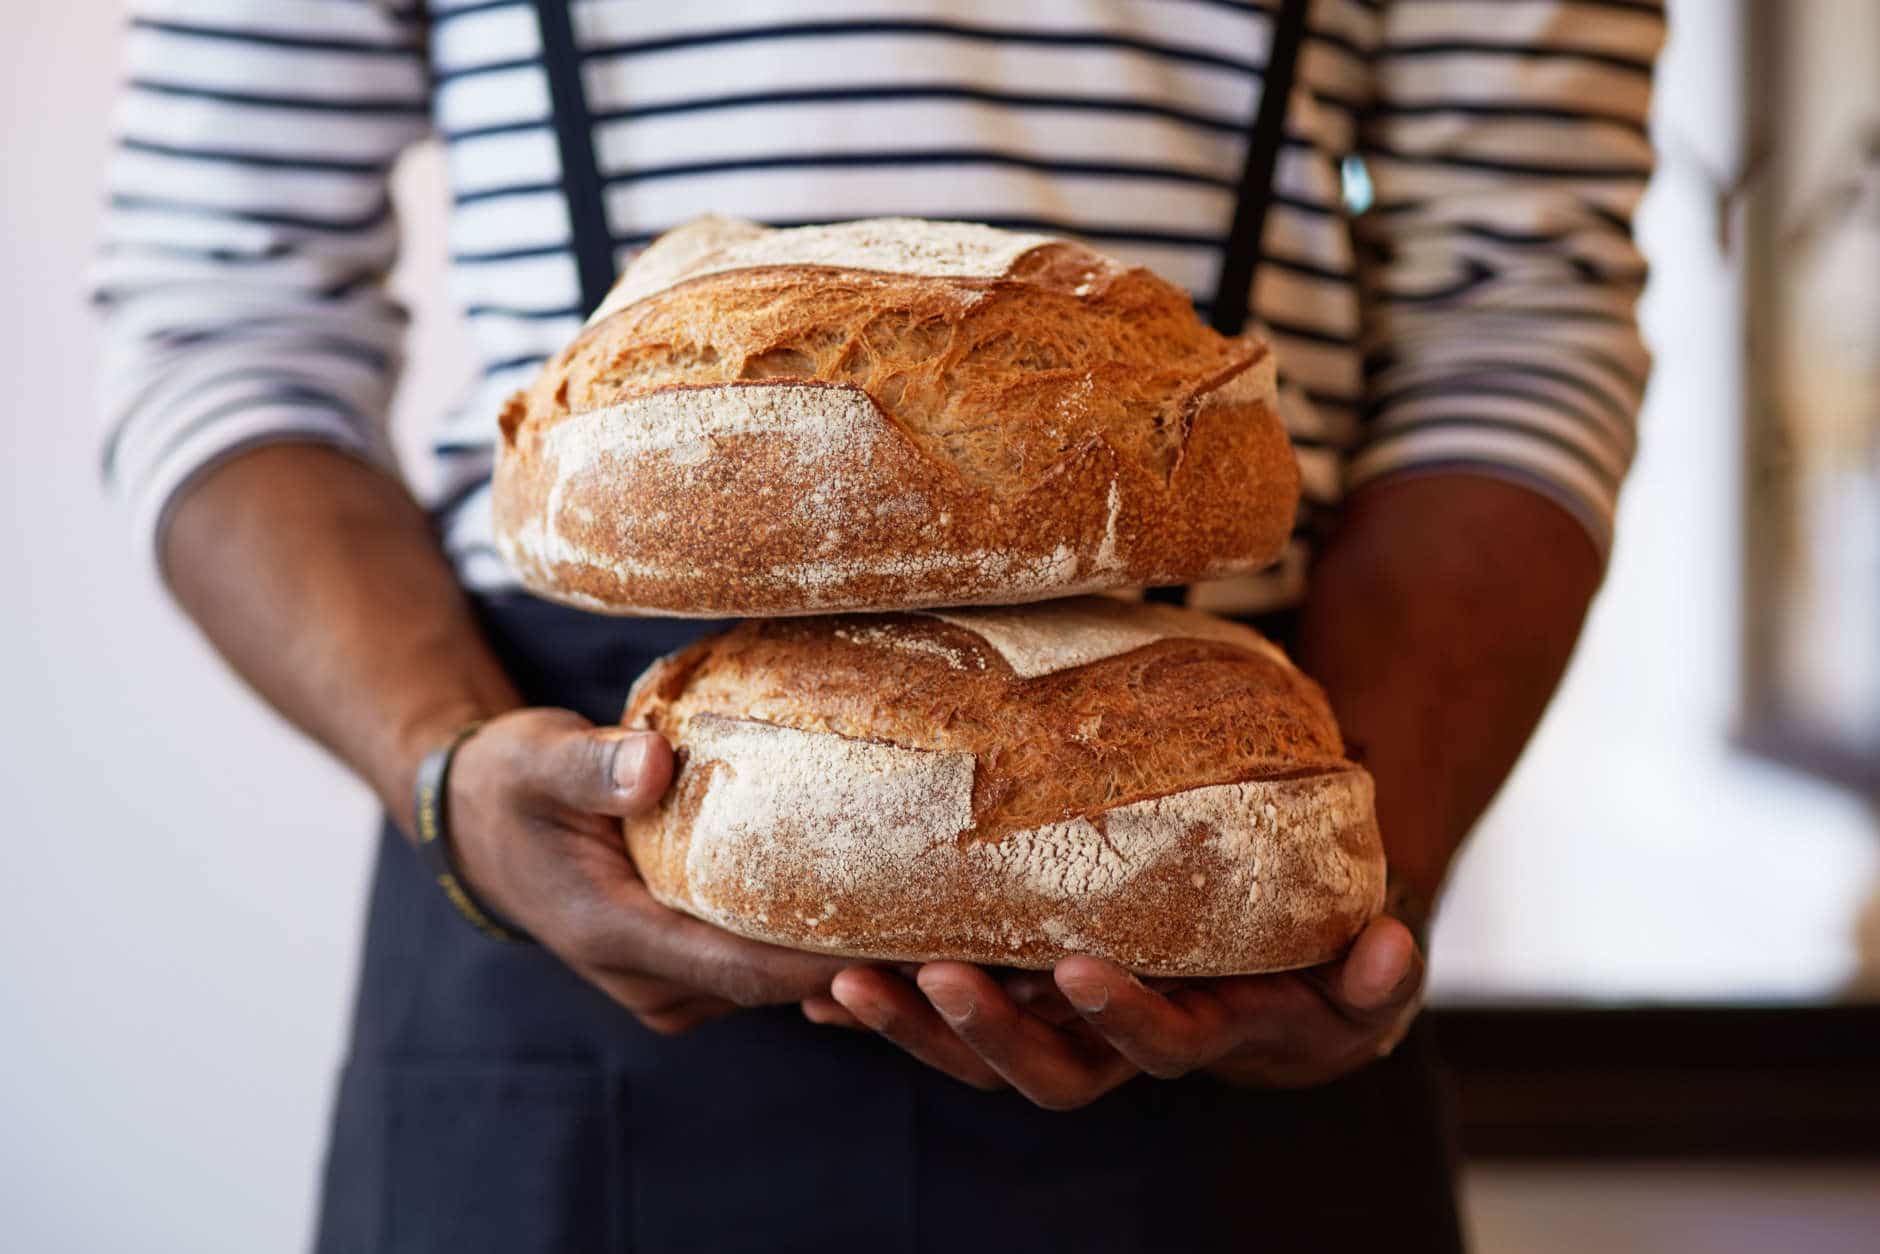  Maison Kayser is known for its bread, which is made using a fermented liquid starter — not yeast. (Courtesy Maison Kayser) 